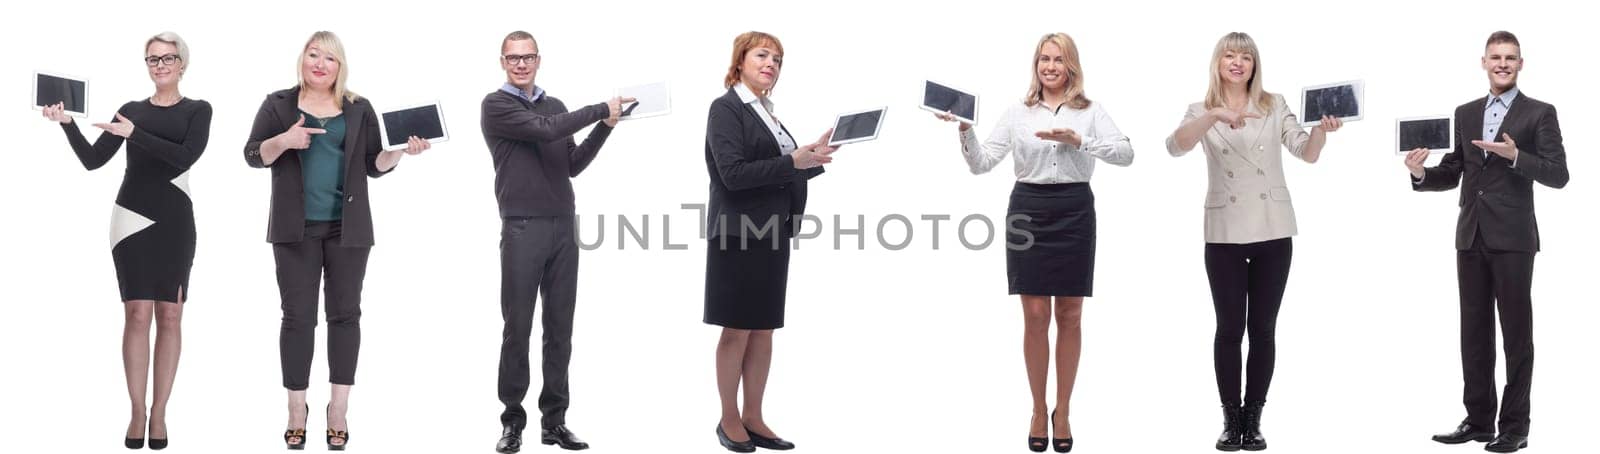 group of people demonstrating tablet isolated on white background